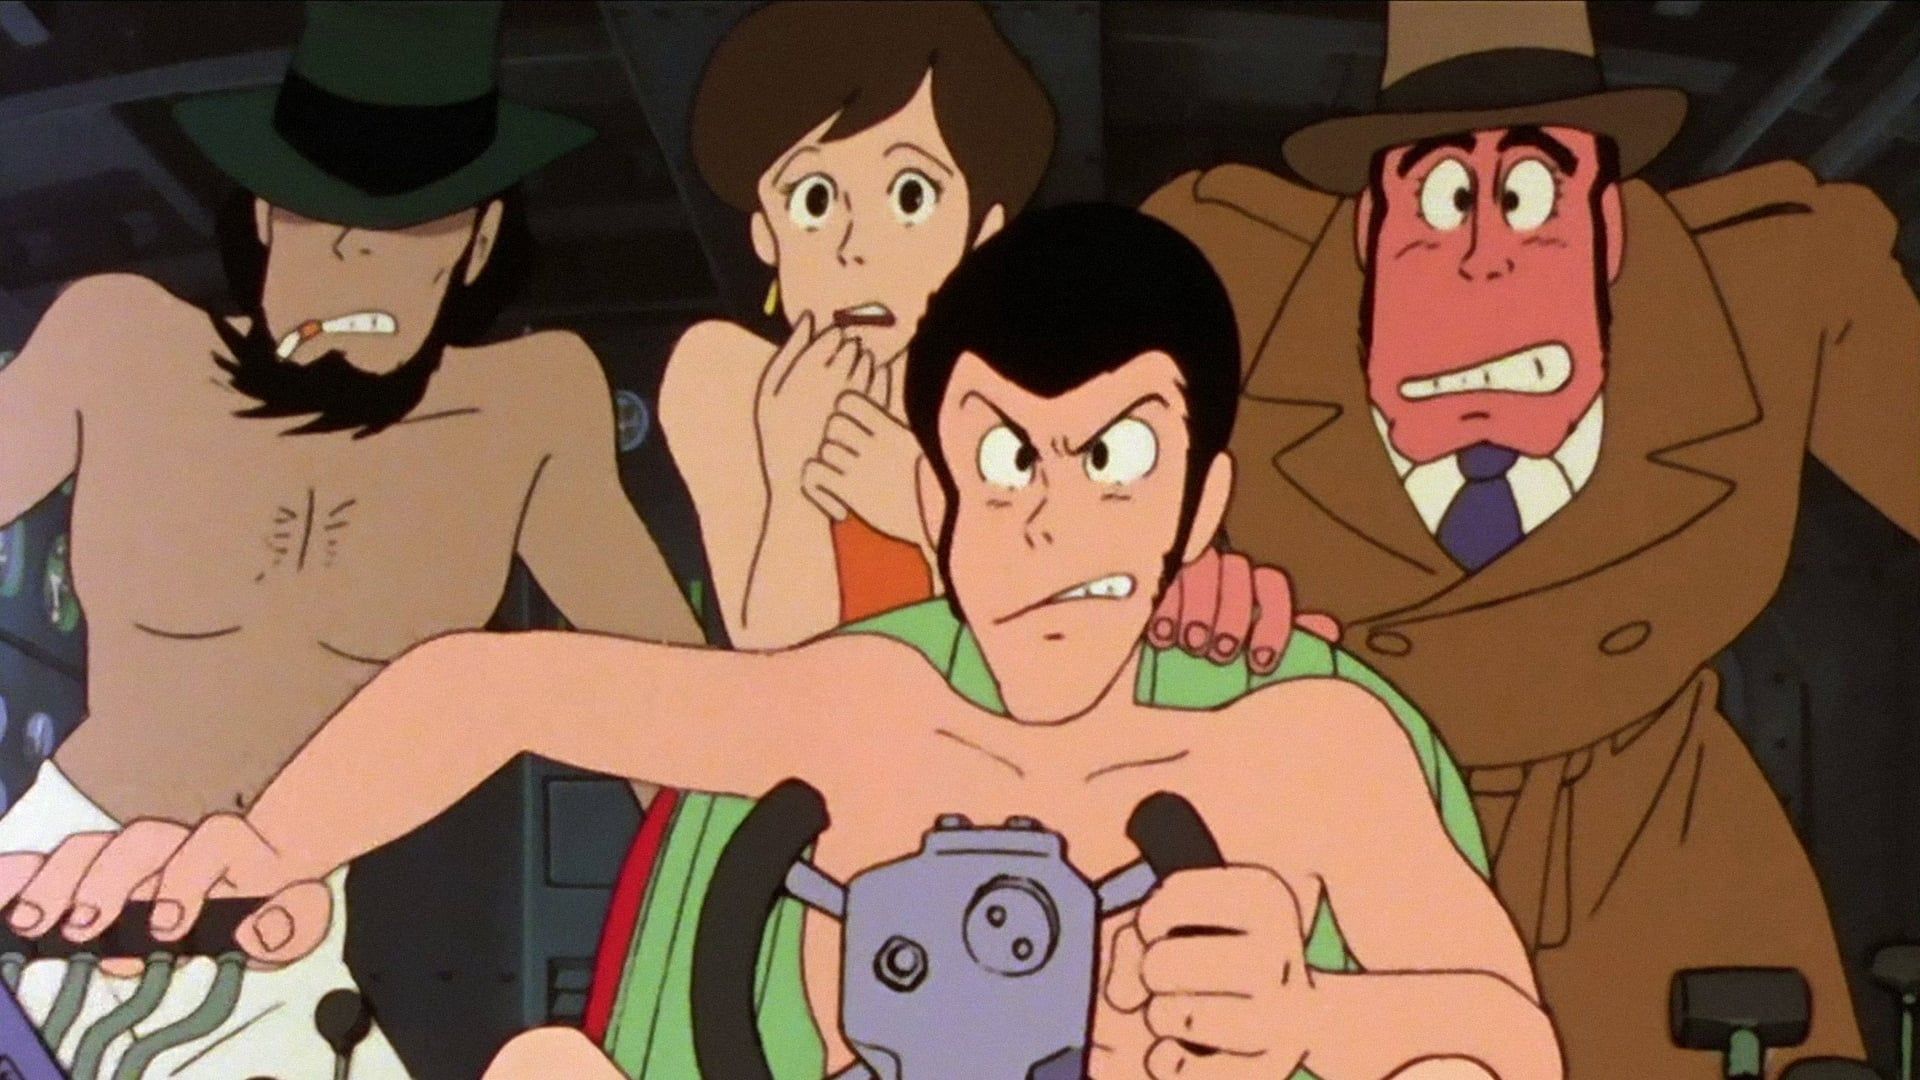 Lupin the 3rd background